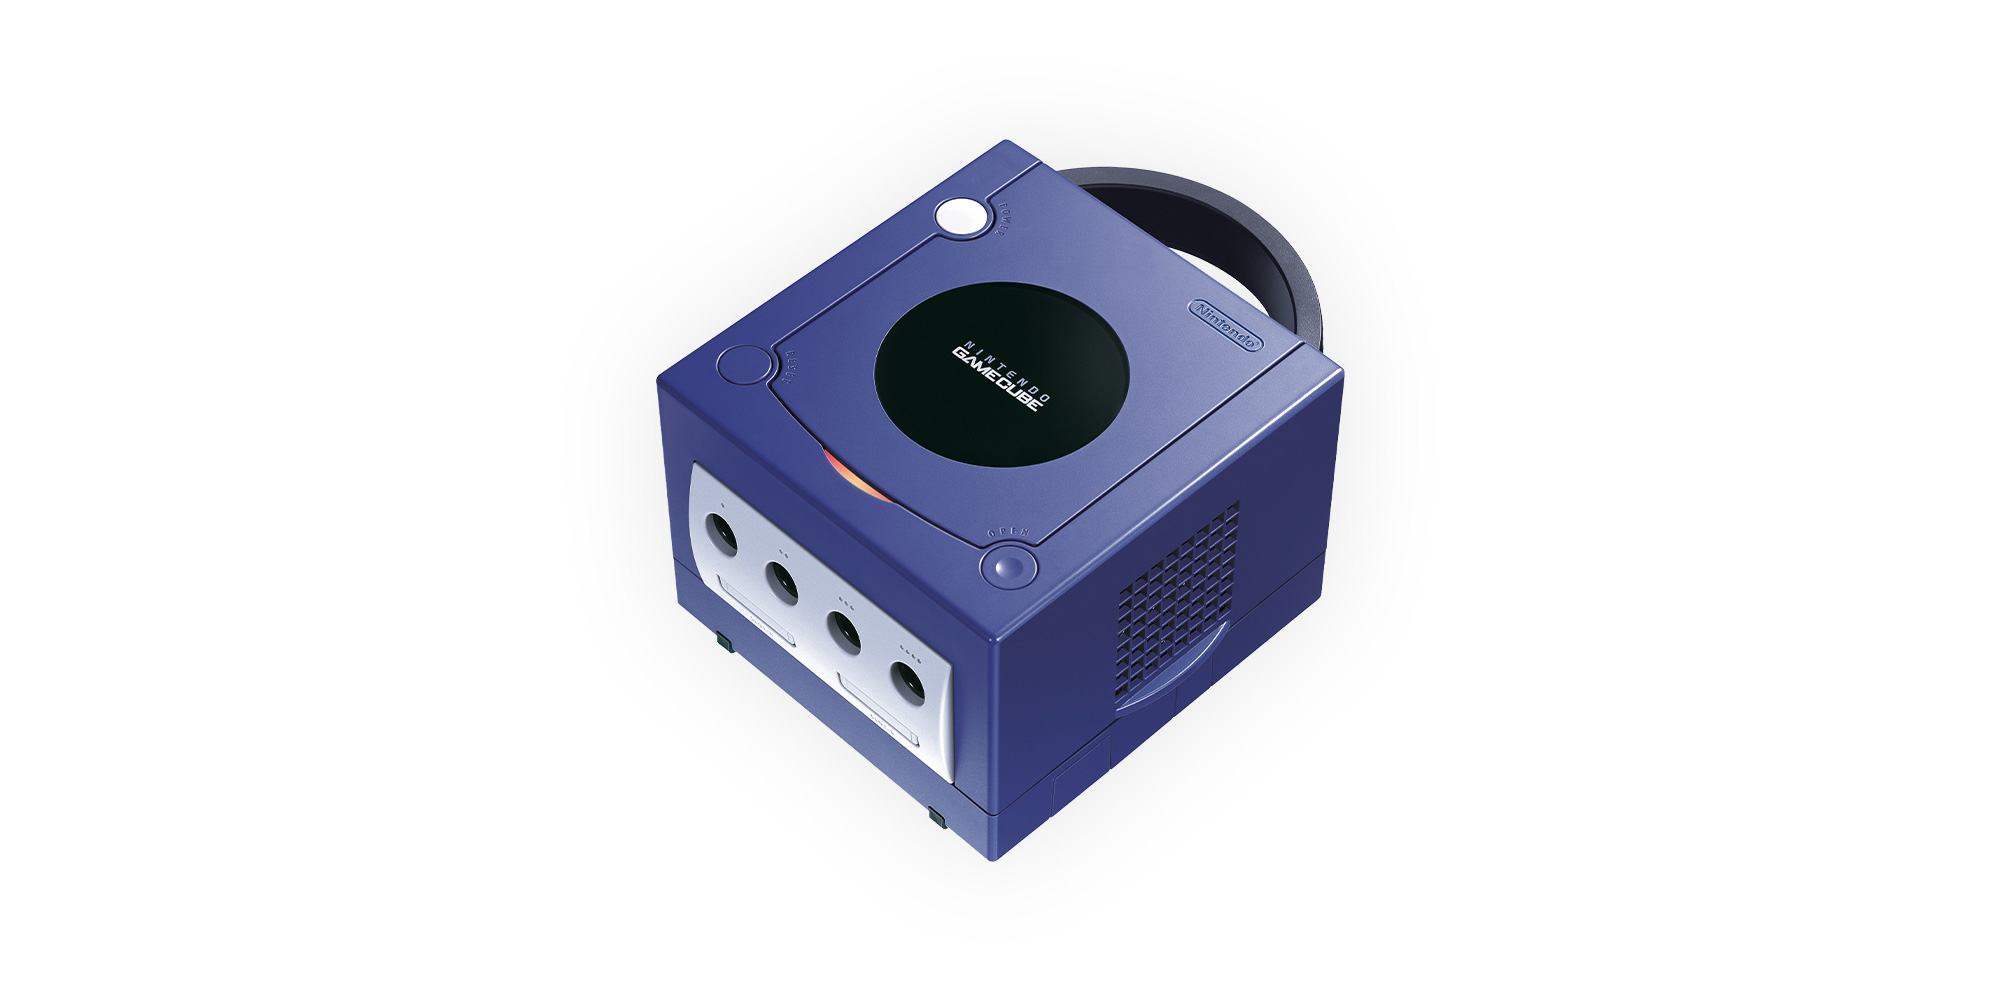 where can i get a gamecube